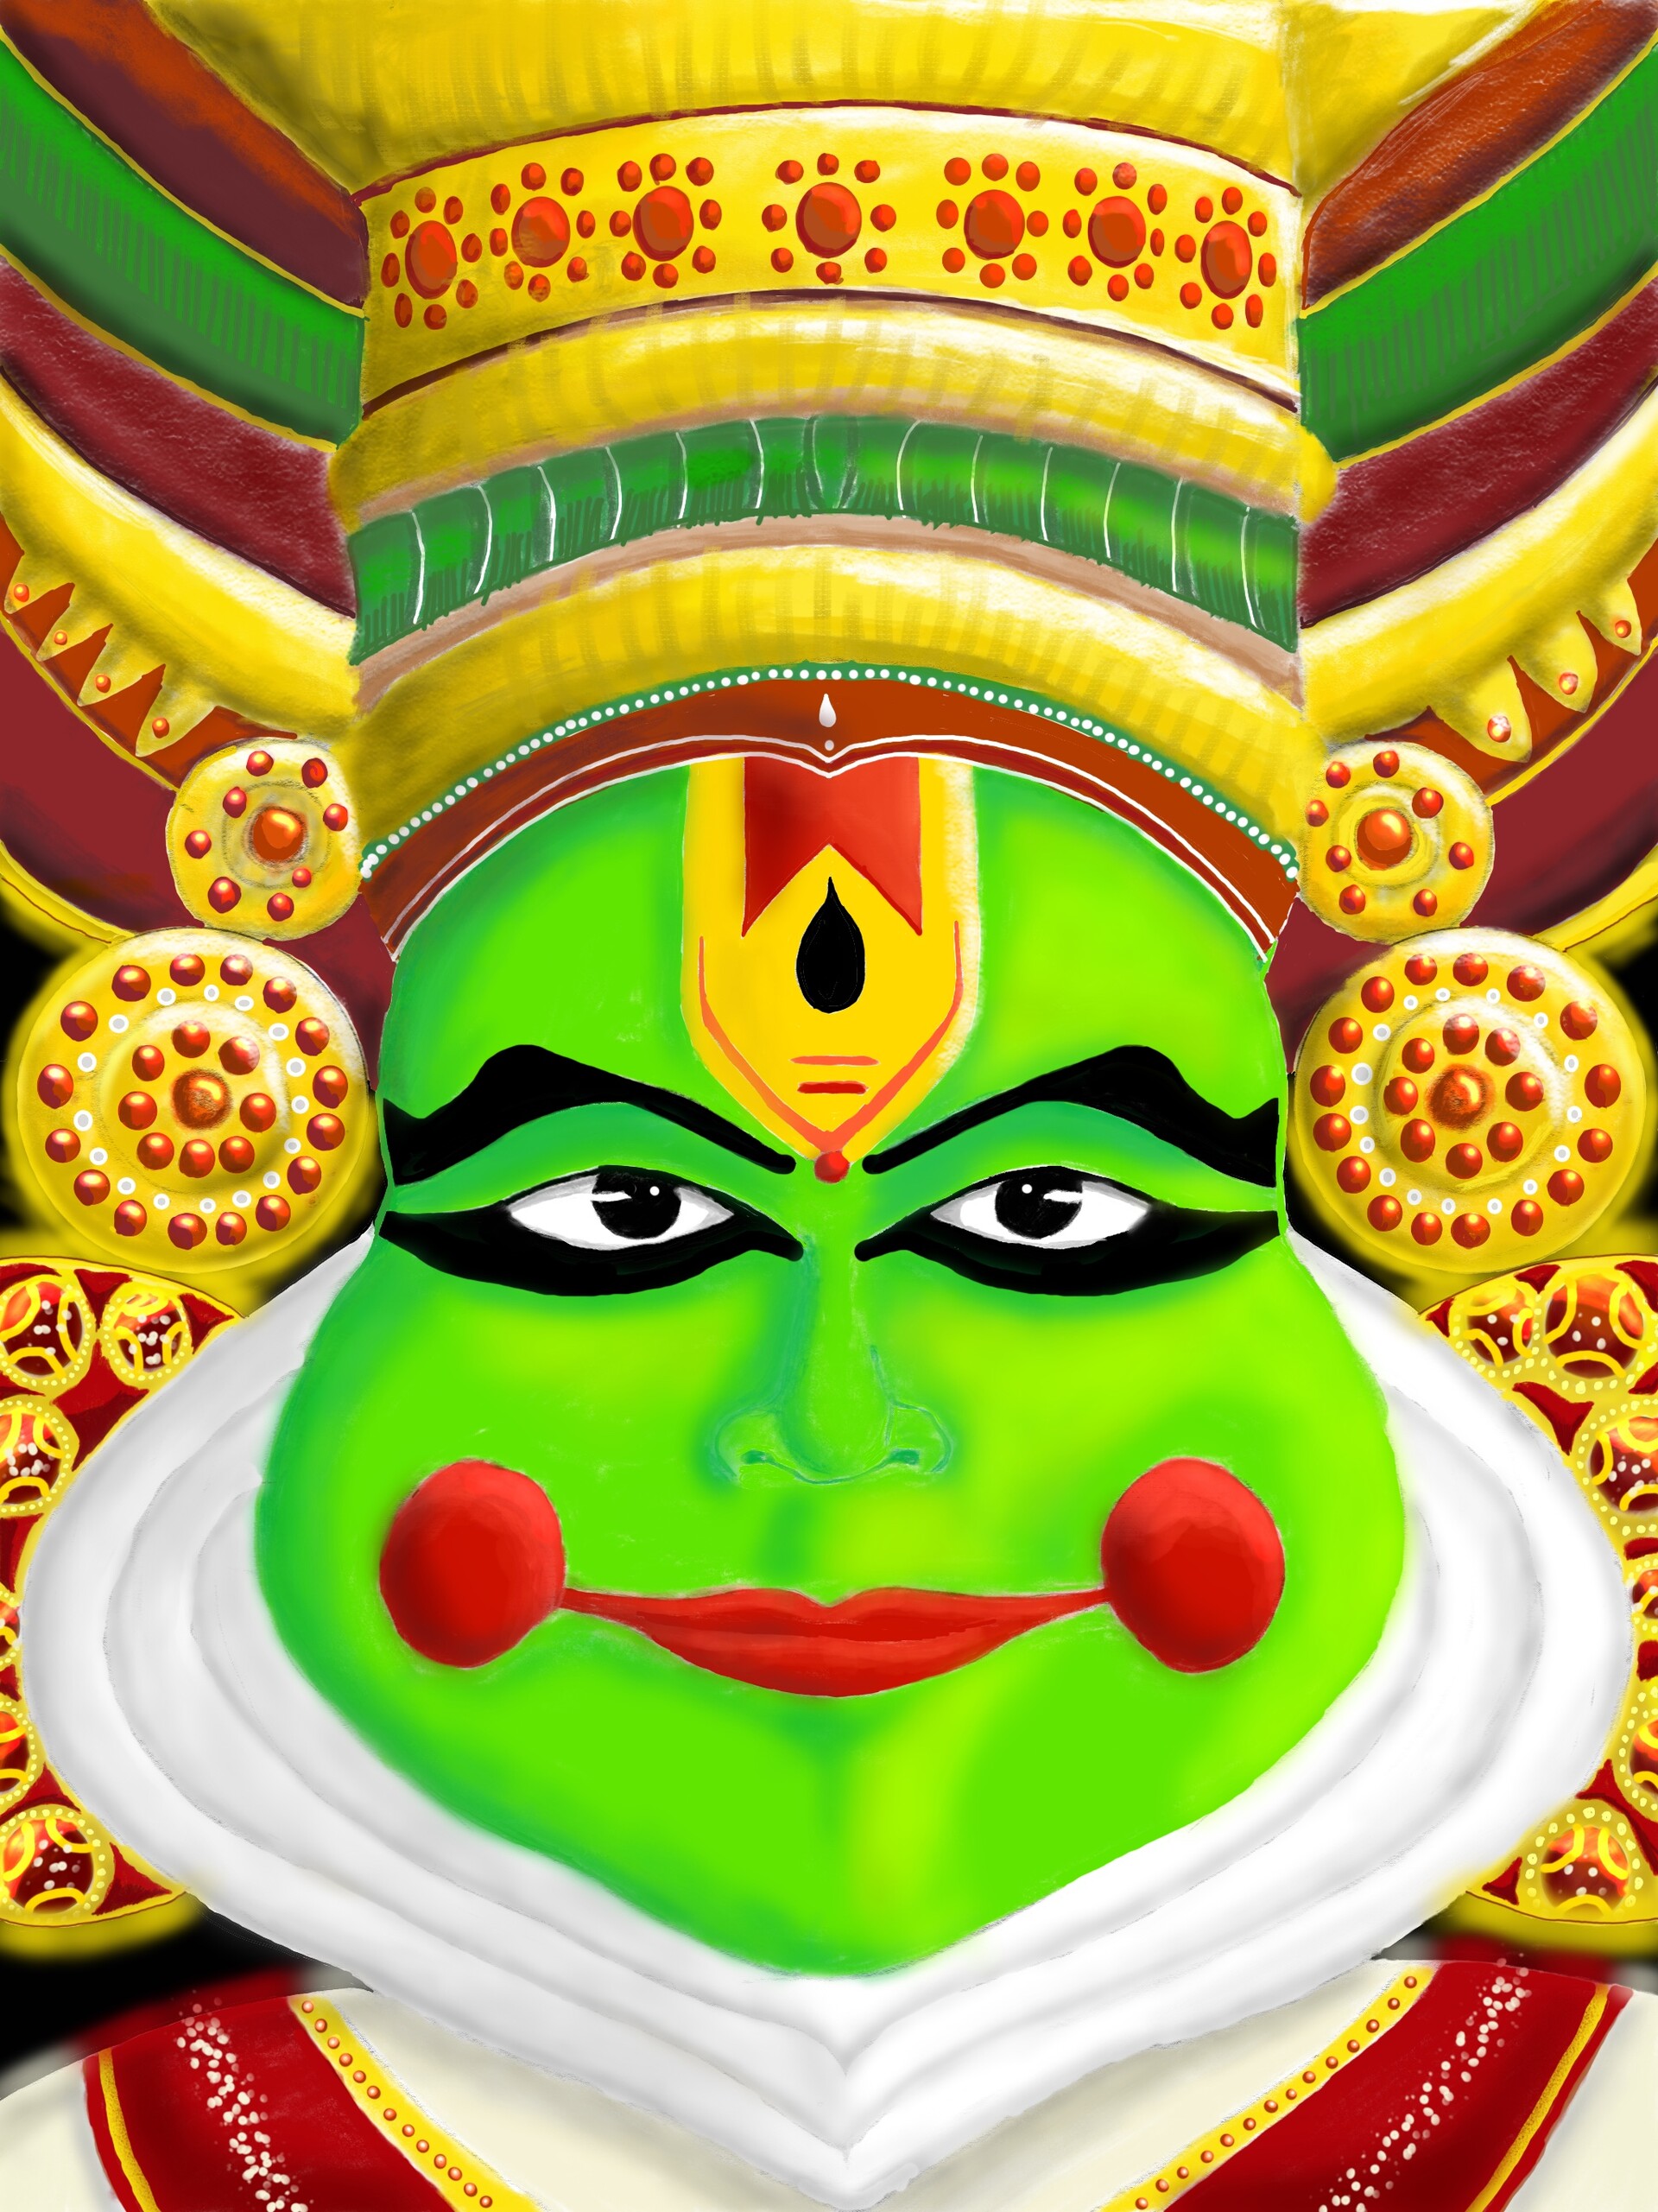 kathakali #howtodraw How to Draw Kathakali dancer face easy | Kathakali  face drawing step by step - YouTube | Kathakali face, Face drawing, Step by  step drawing